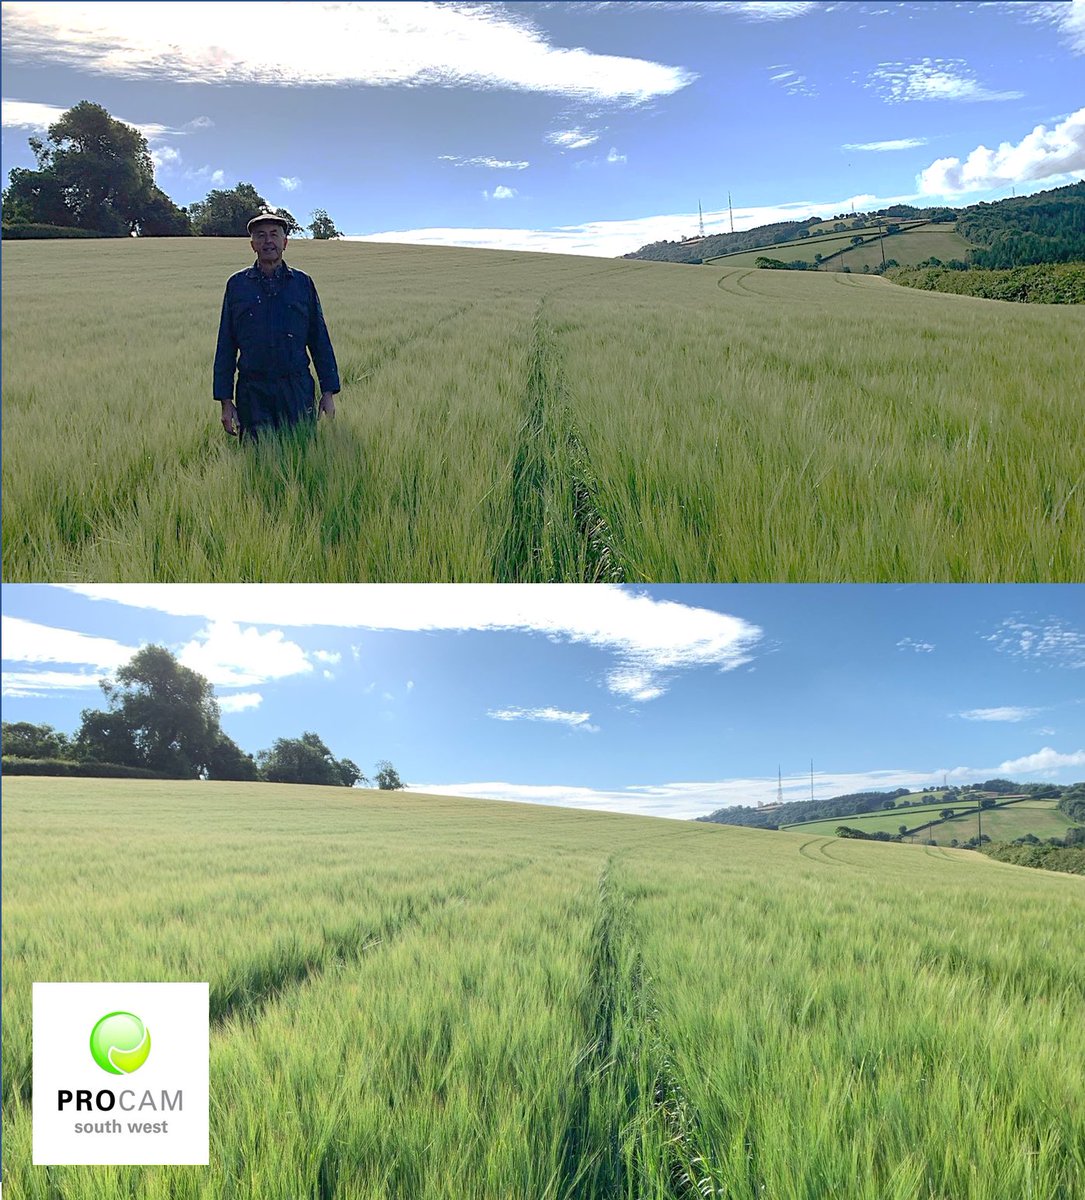 We have been busy with the judging of our pre-show competitions this week.  Here are some wonderful images of entries in the Arable Crops section. Many thanks to Procam for sponsoring the Totnes Show – Arable Crops competitions! @Procamsouthwest #backbritishfarming